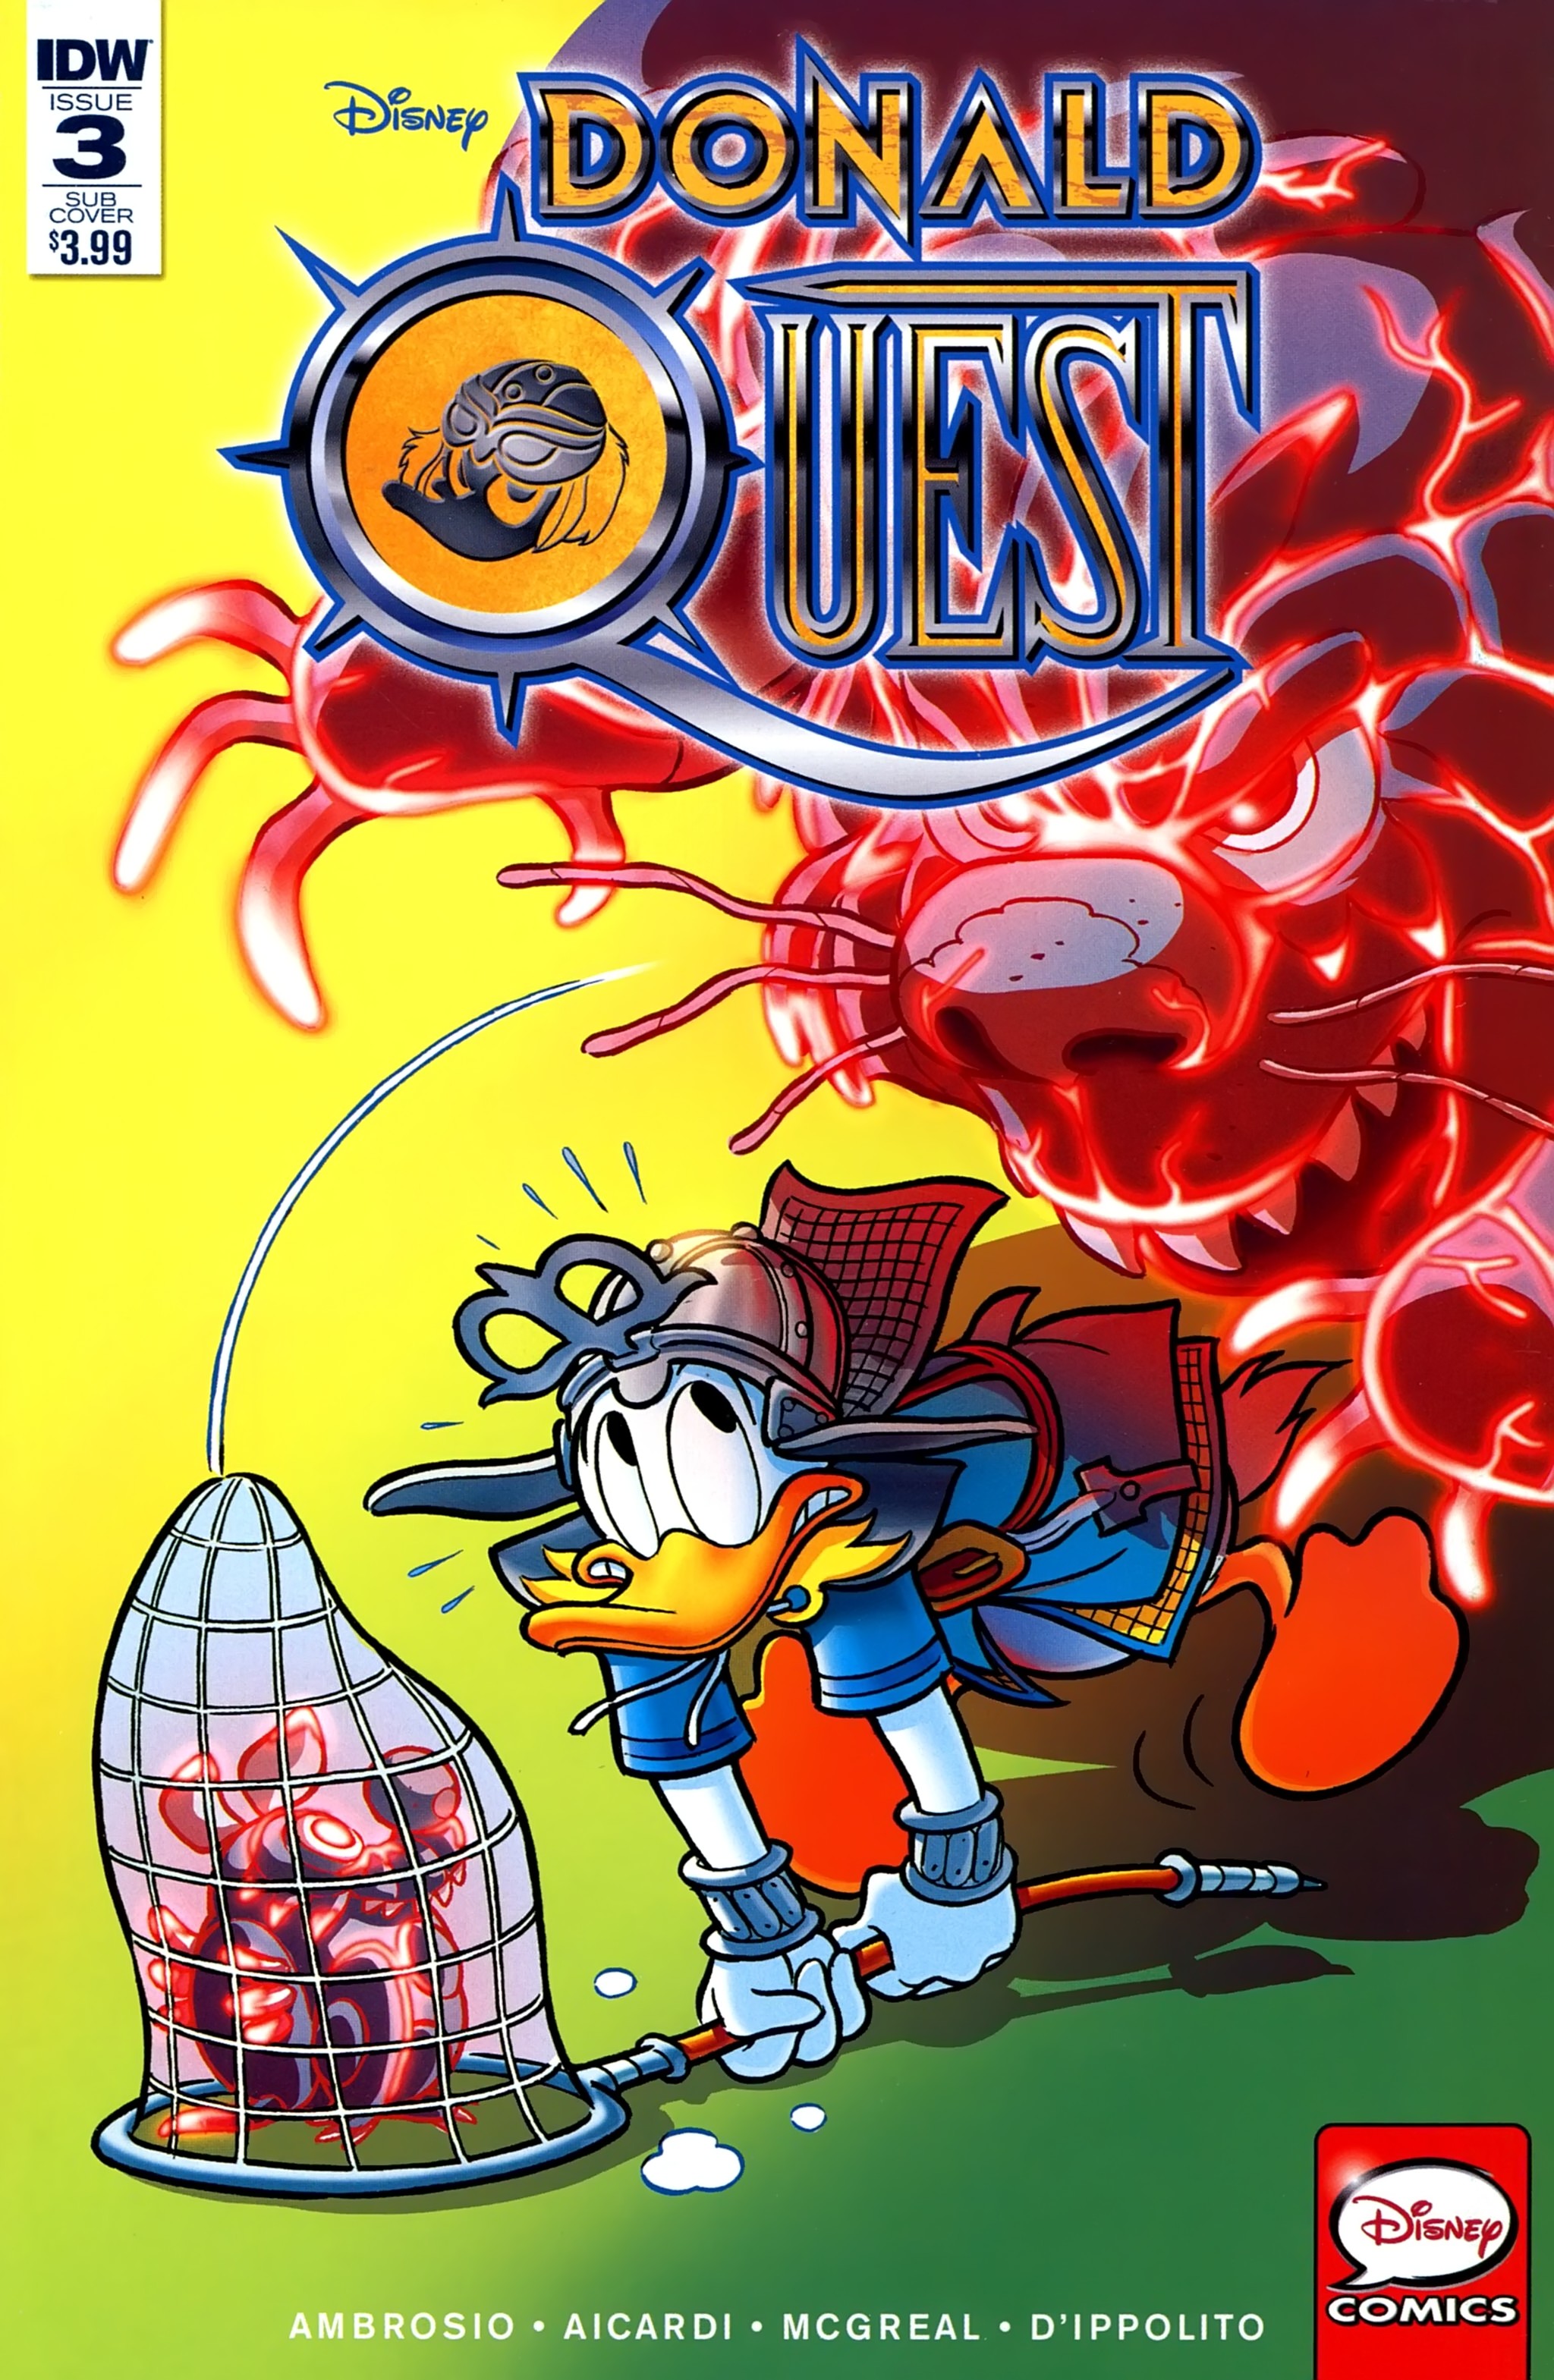 Read online Donald Quest comic -  Issue #3 - 1